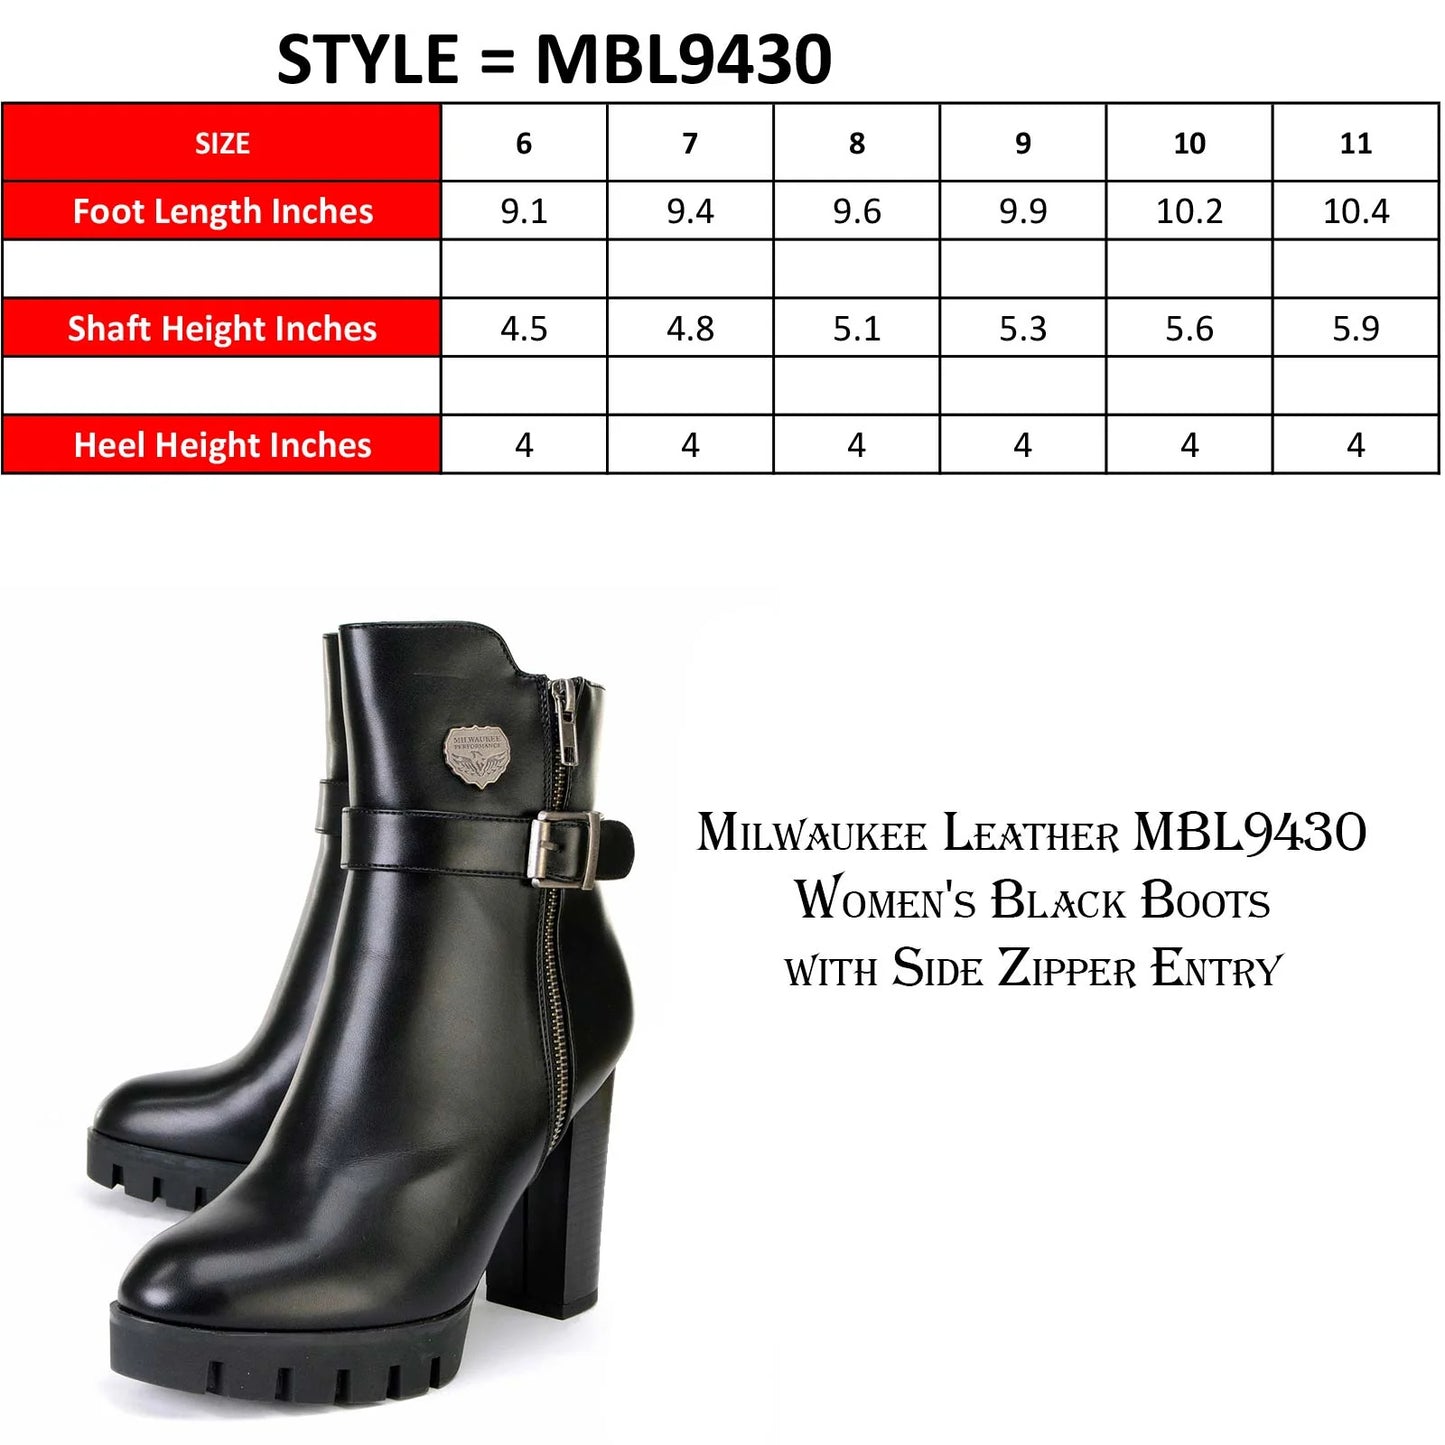 Women's Black Fashion Casual Boots With Side Zipper Entry